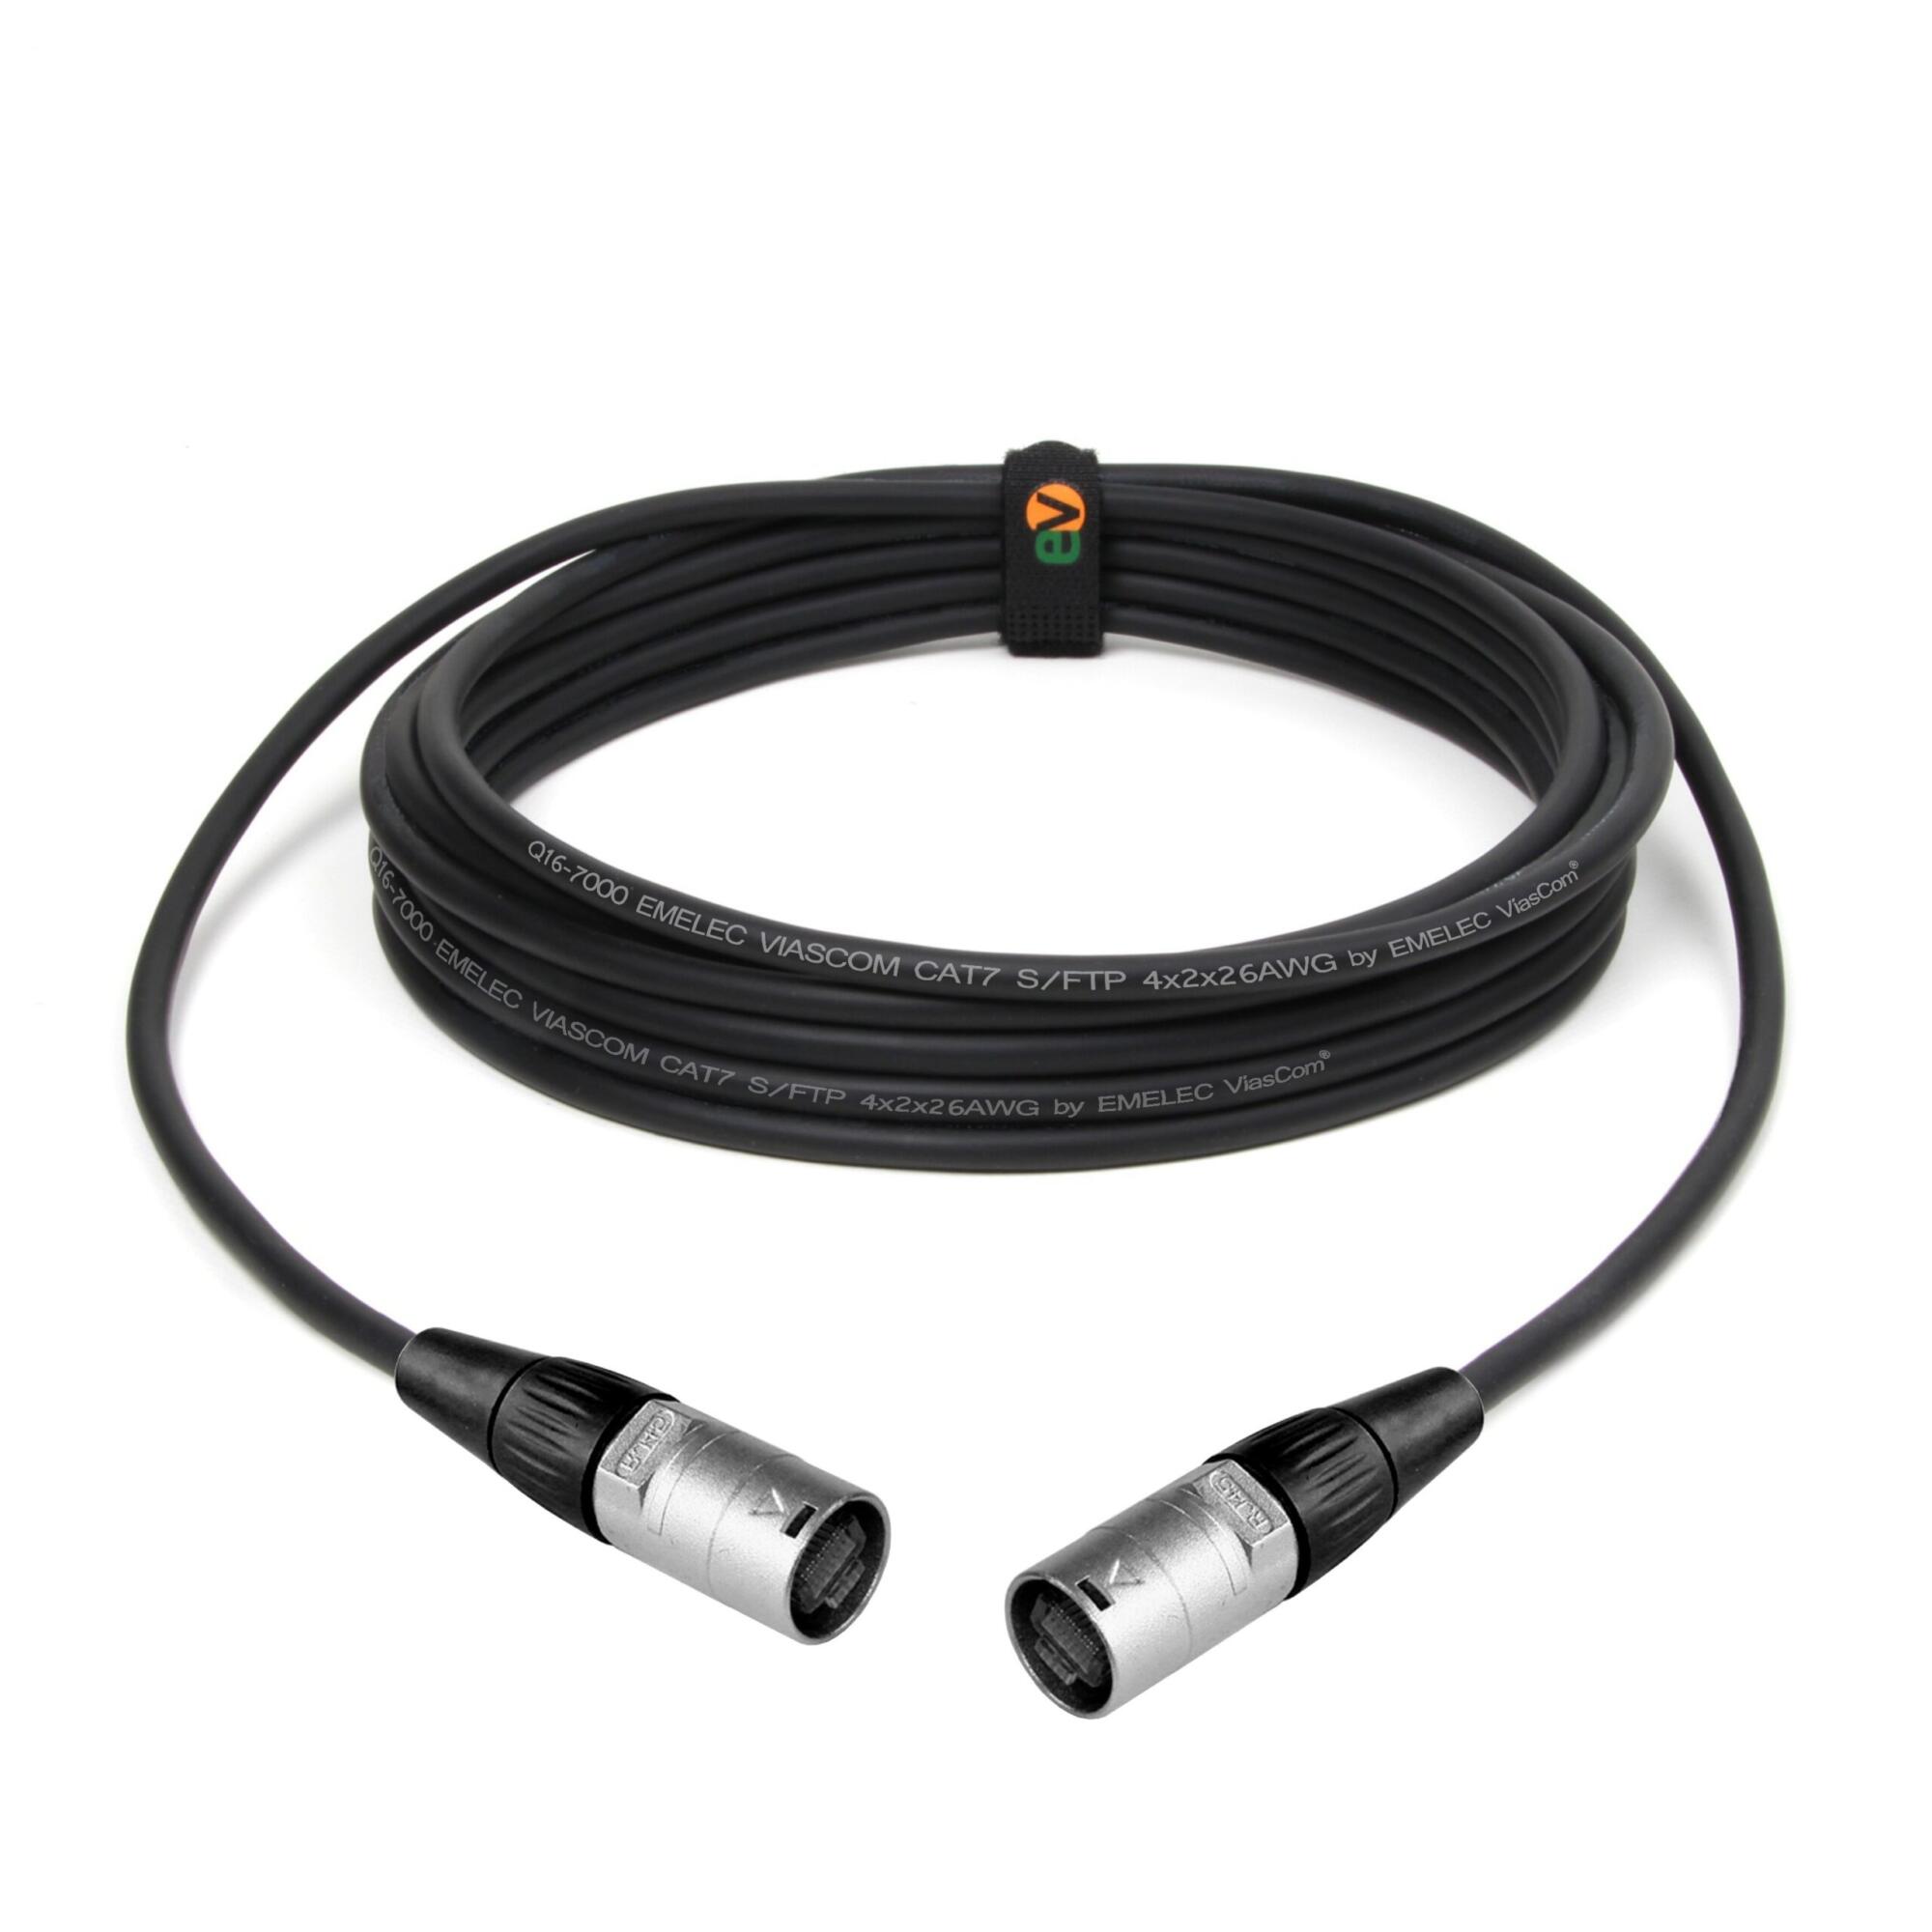 CAT7 S/FTP Mounted Digital Cable with RJ45 Body